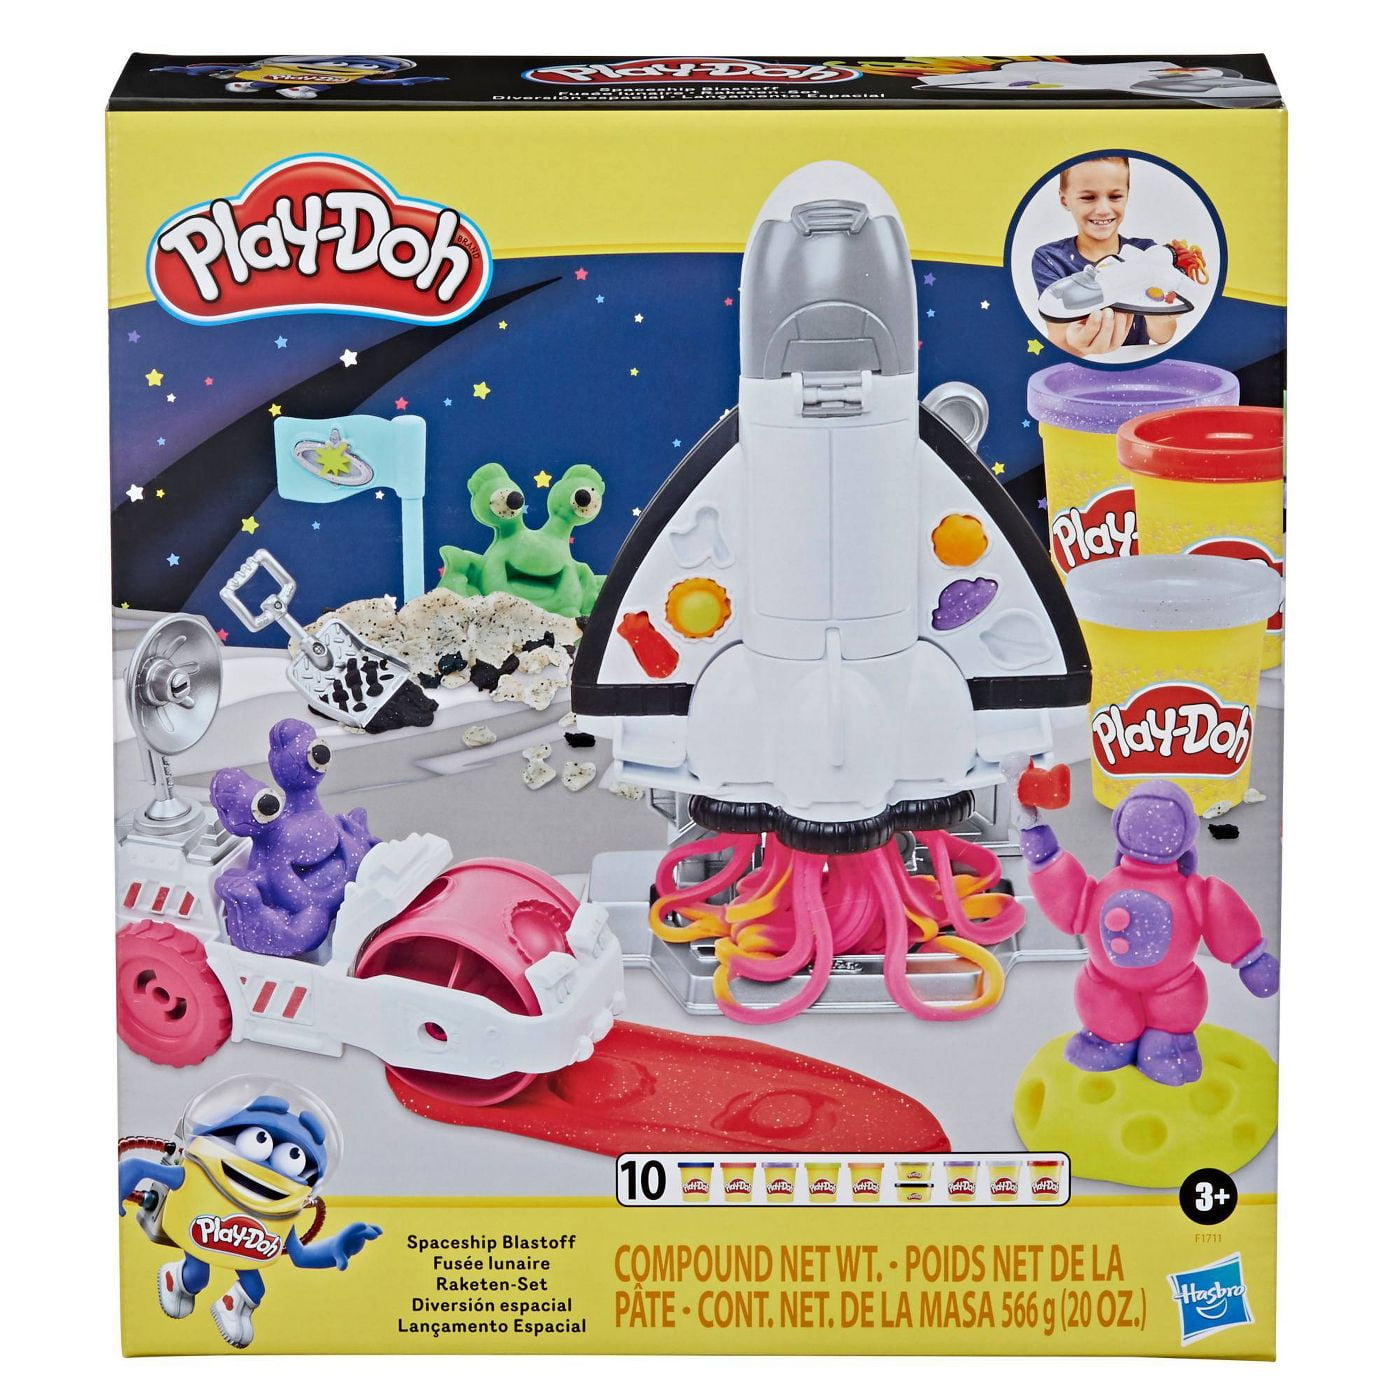 Kids Children's 2-in-1 Rocket Money Box and Play Dough Set Gift For Little Ones 